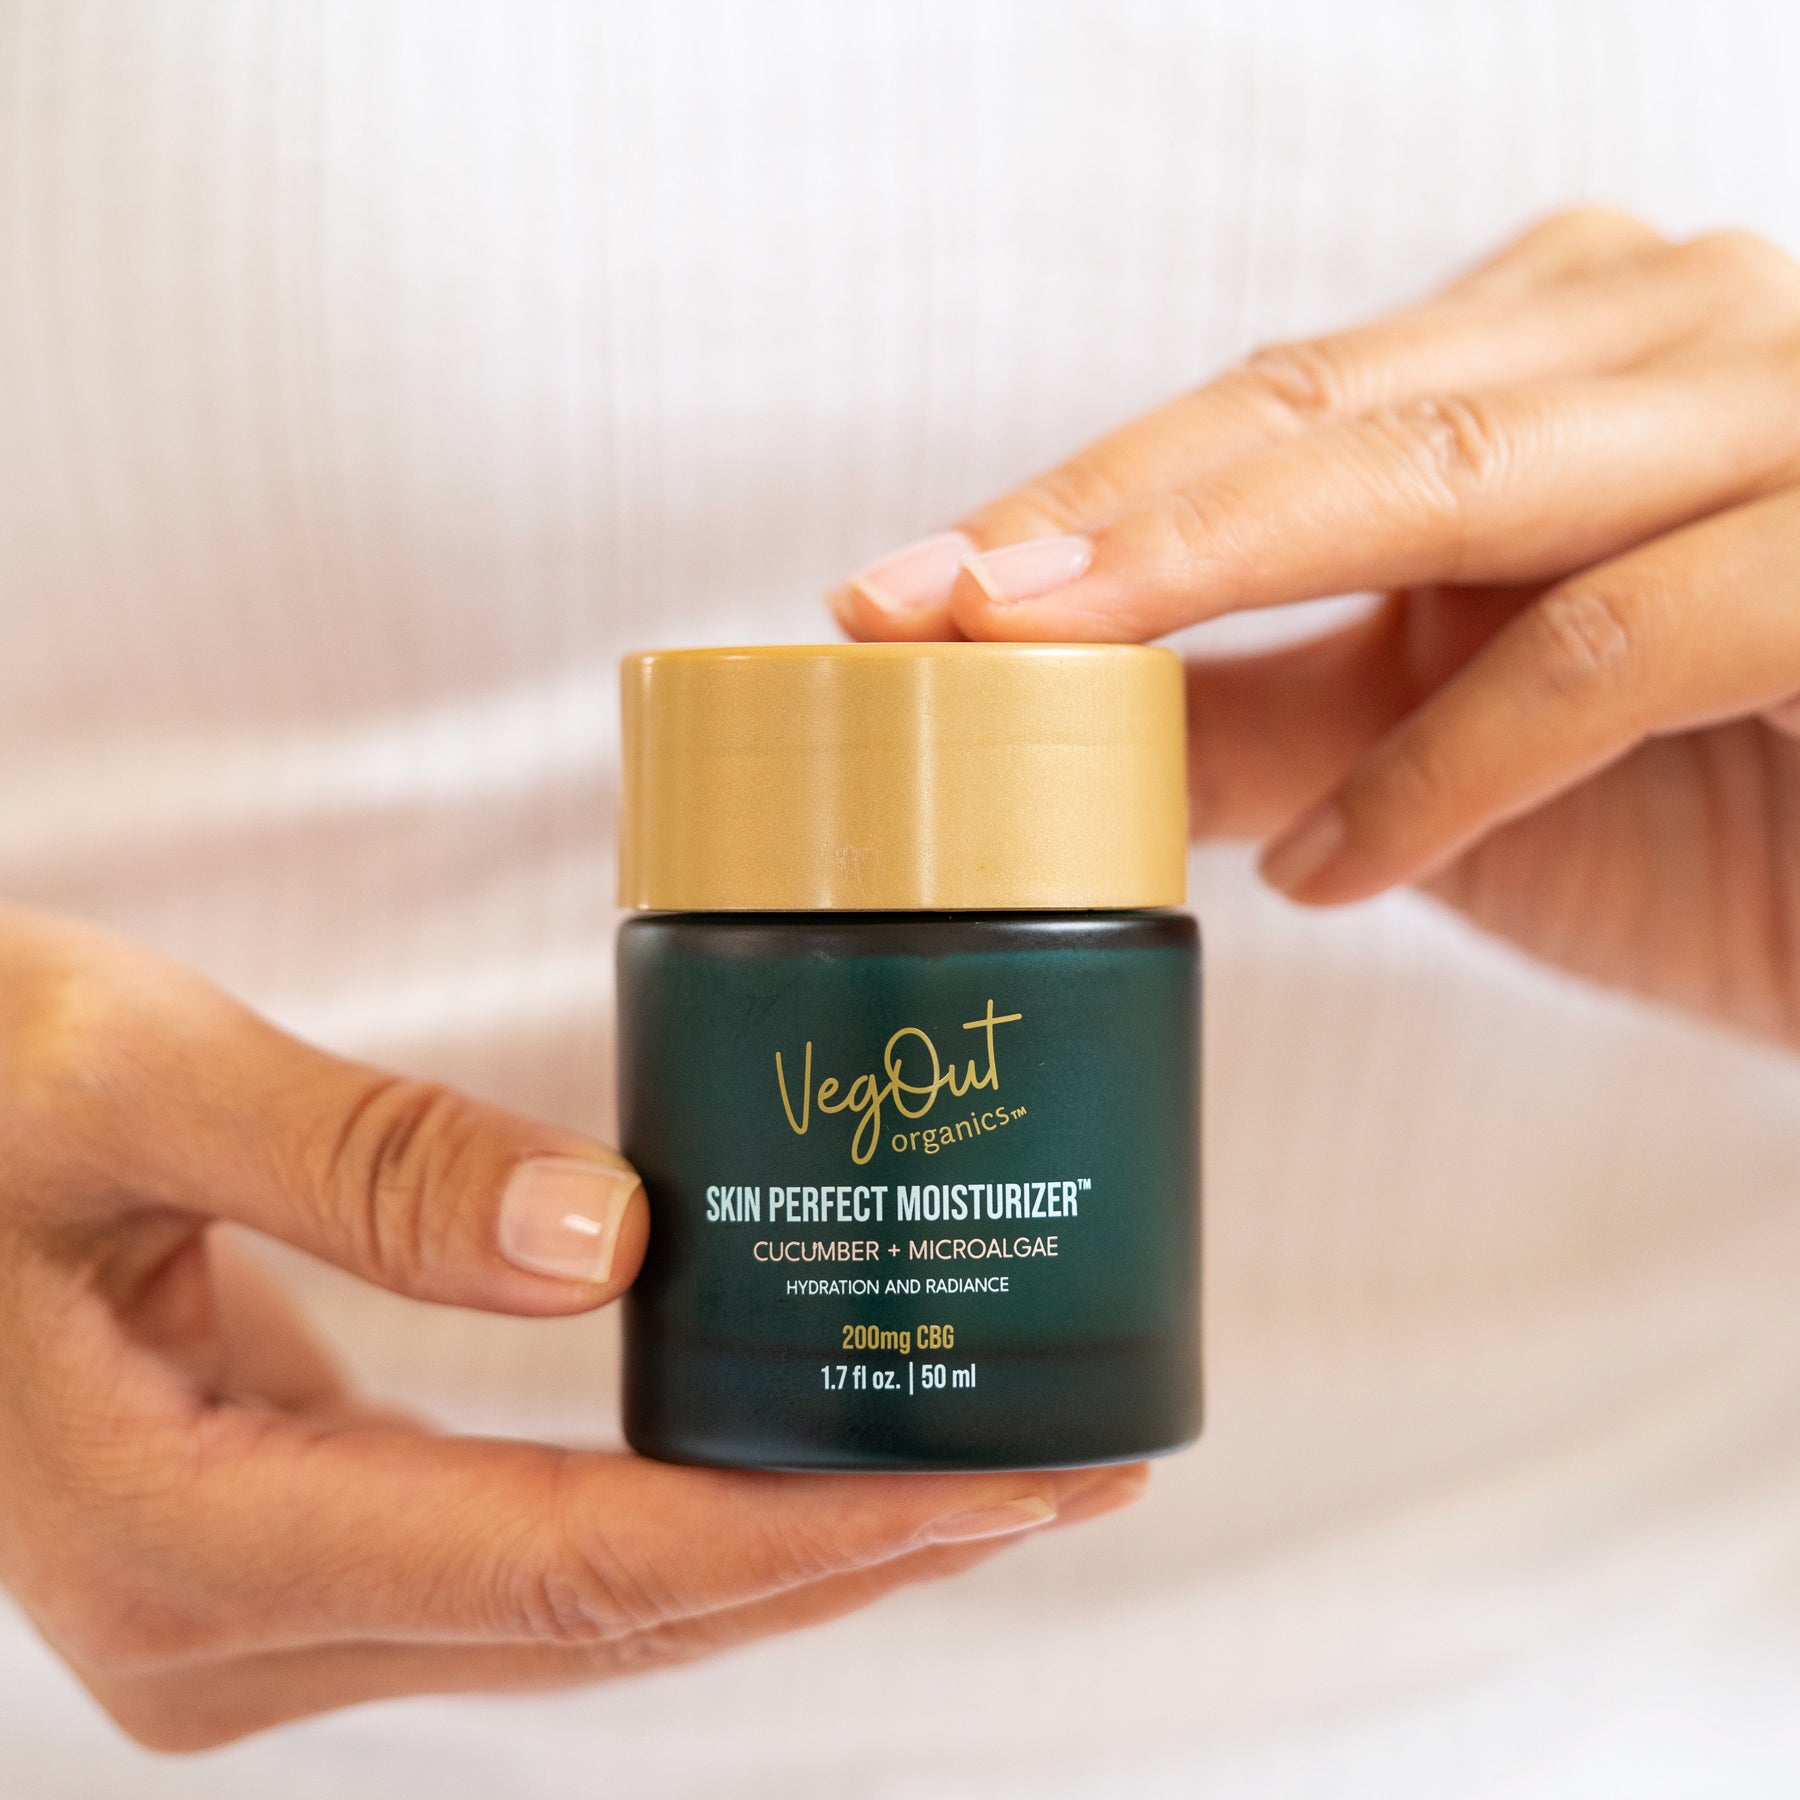 Skin Perfect Moisturizer for hydrated and radiant skin